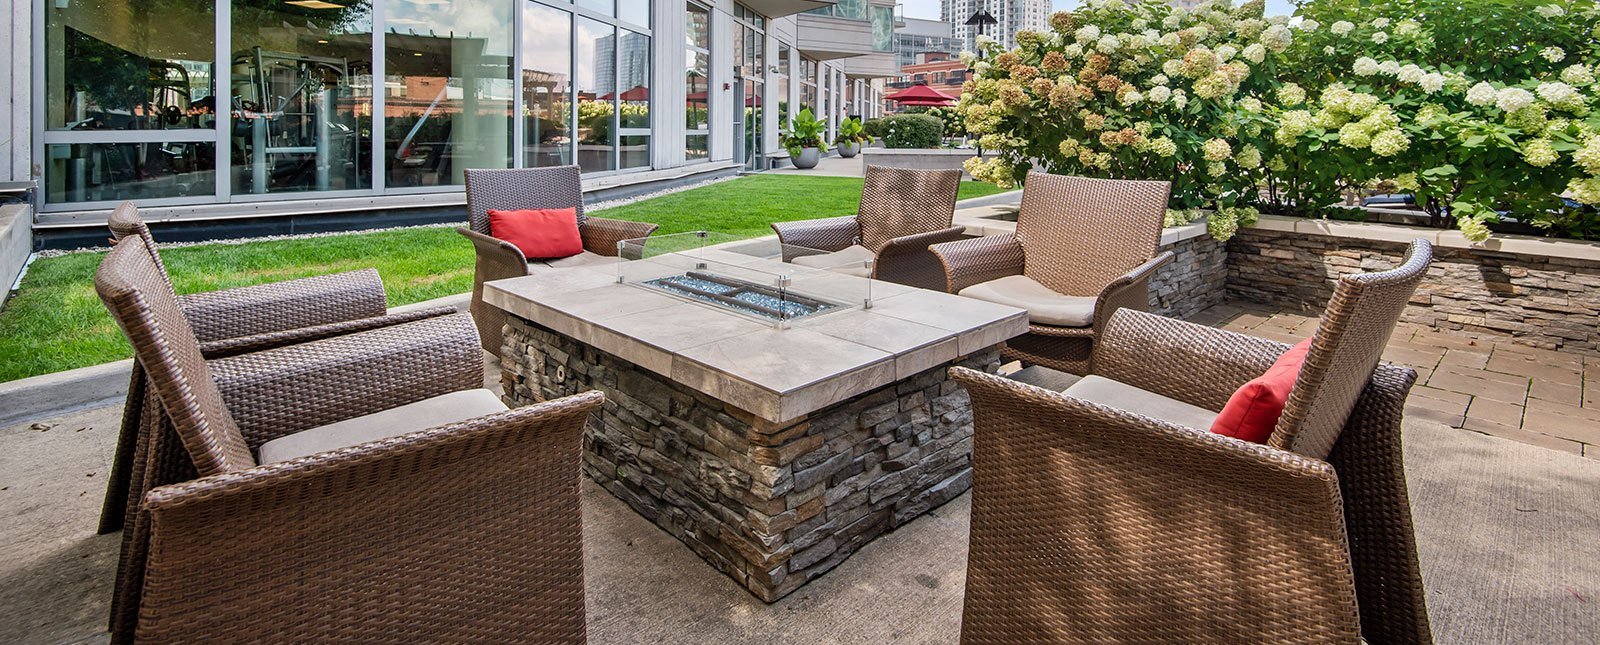 Spacious, landscaped outdoor terrace with lush seating, grills and a fire pit